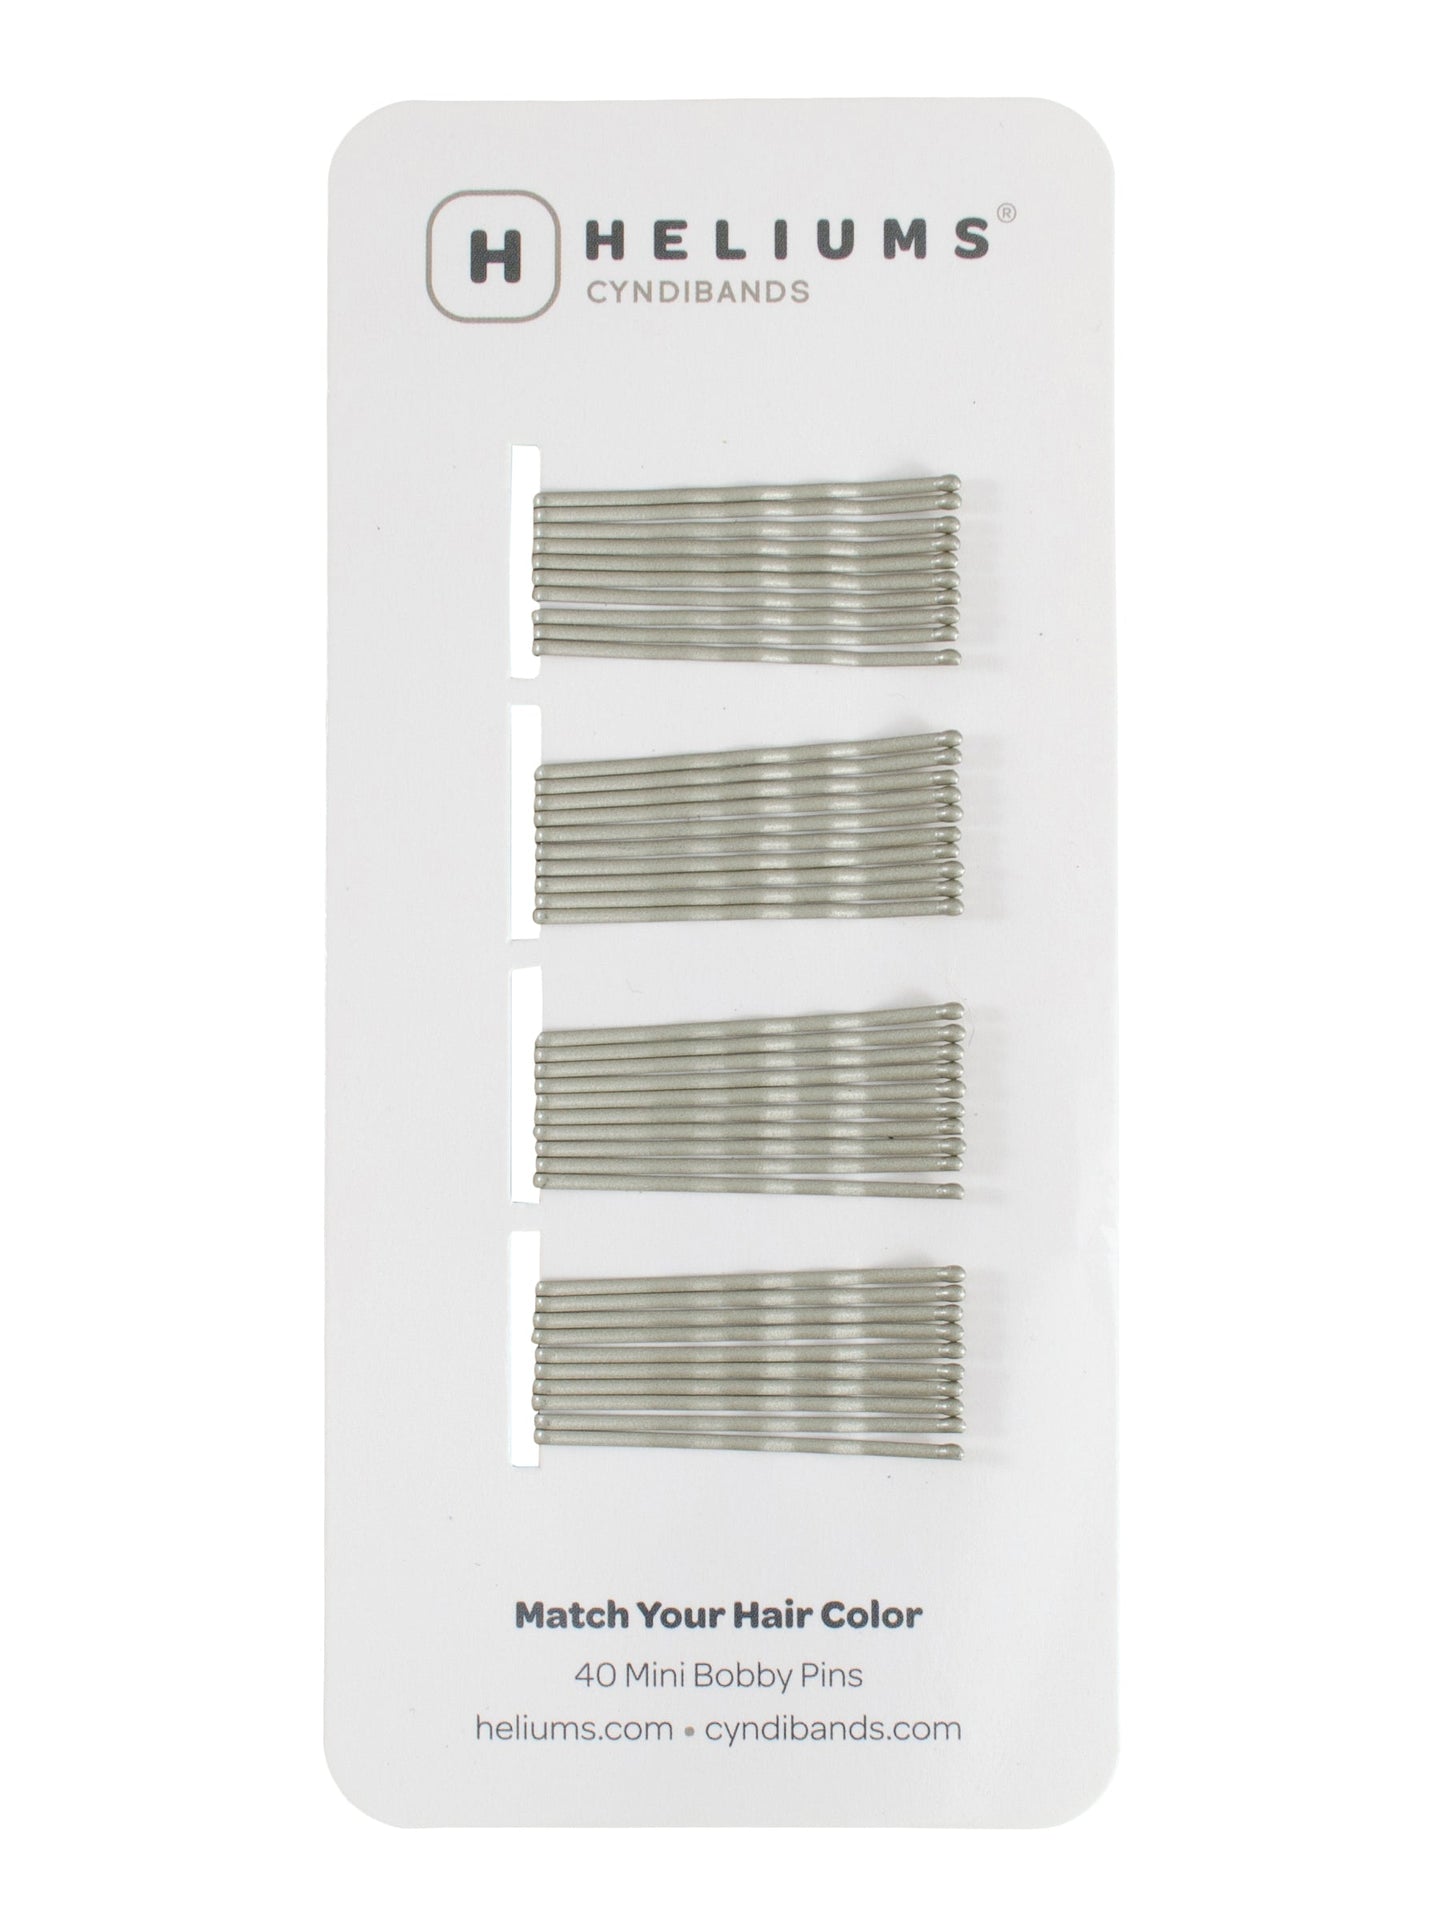 Heliums Mini Bobby Pins - 40 Pack, 1.5 Inch Small Hair Pins - Gray